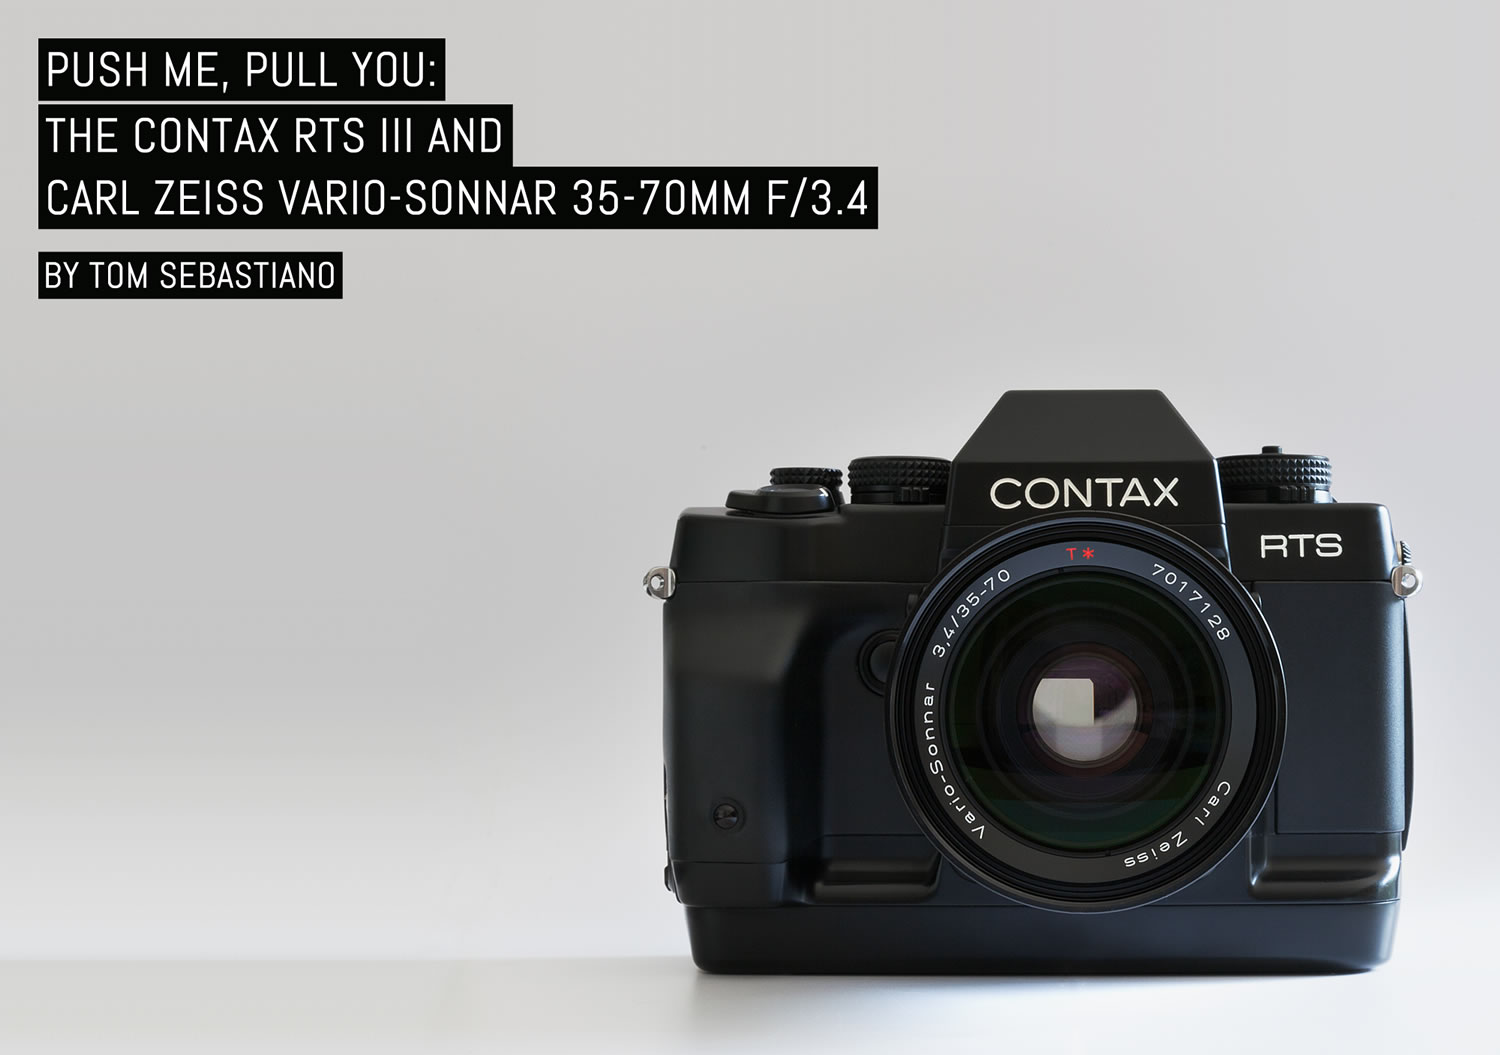 Push me, pull you: The Contax RTS III and Carl Zeiss Vario-Sonnar